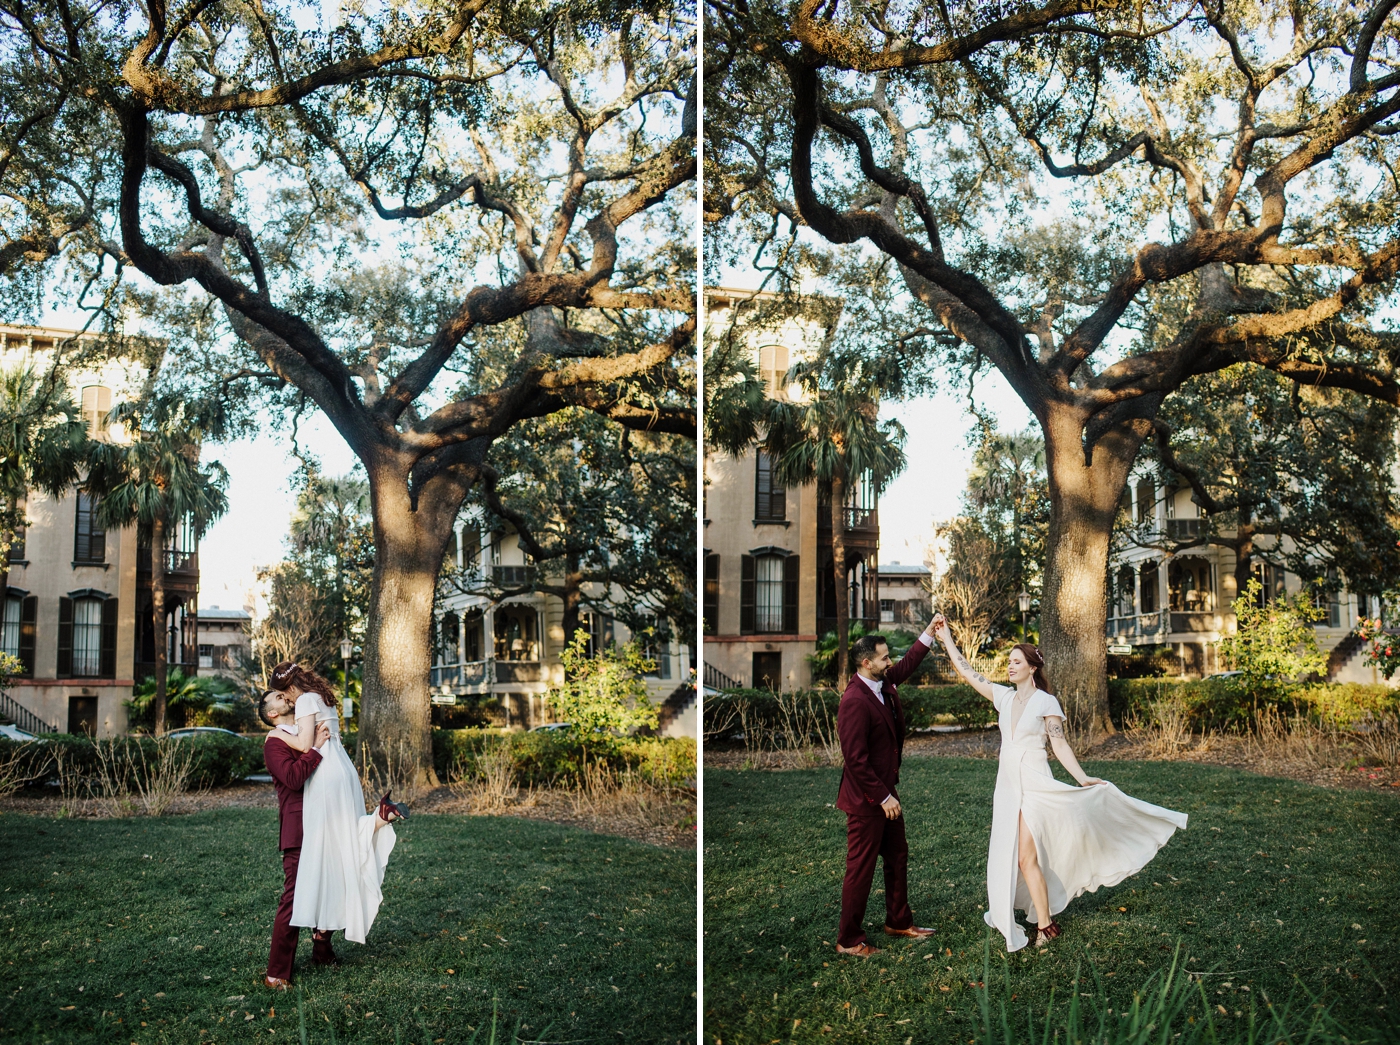 Whitefield Square Elopement by Izzy and Co.